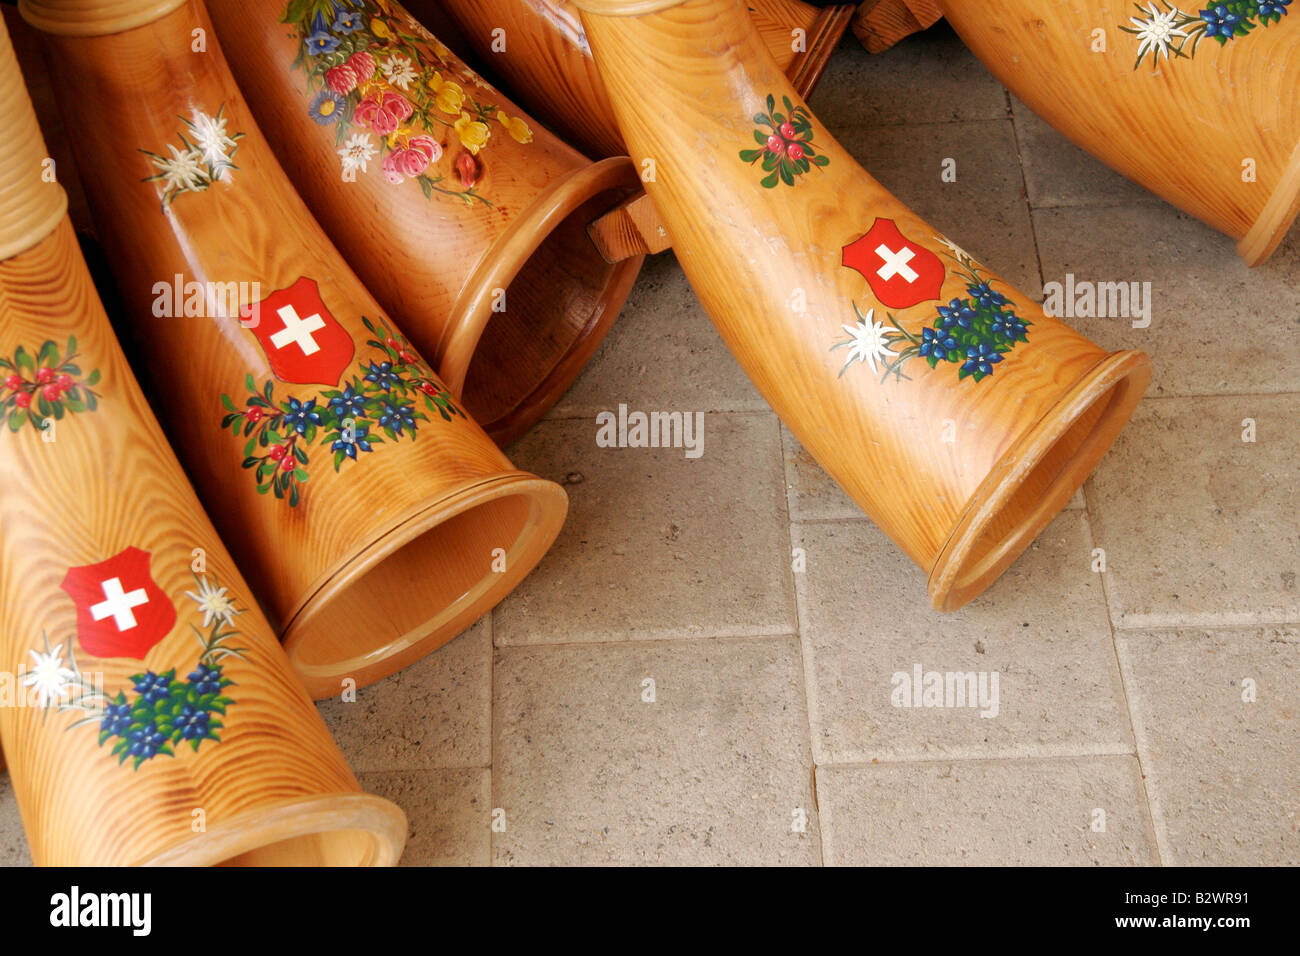 Alphorns with traditional swiss flag and flower decorations painted, Jodlerfest in Malters, near Lucerne, Central Switzerland Stock Photo